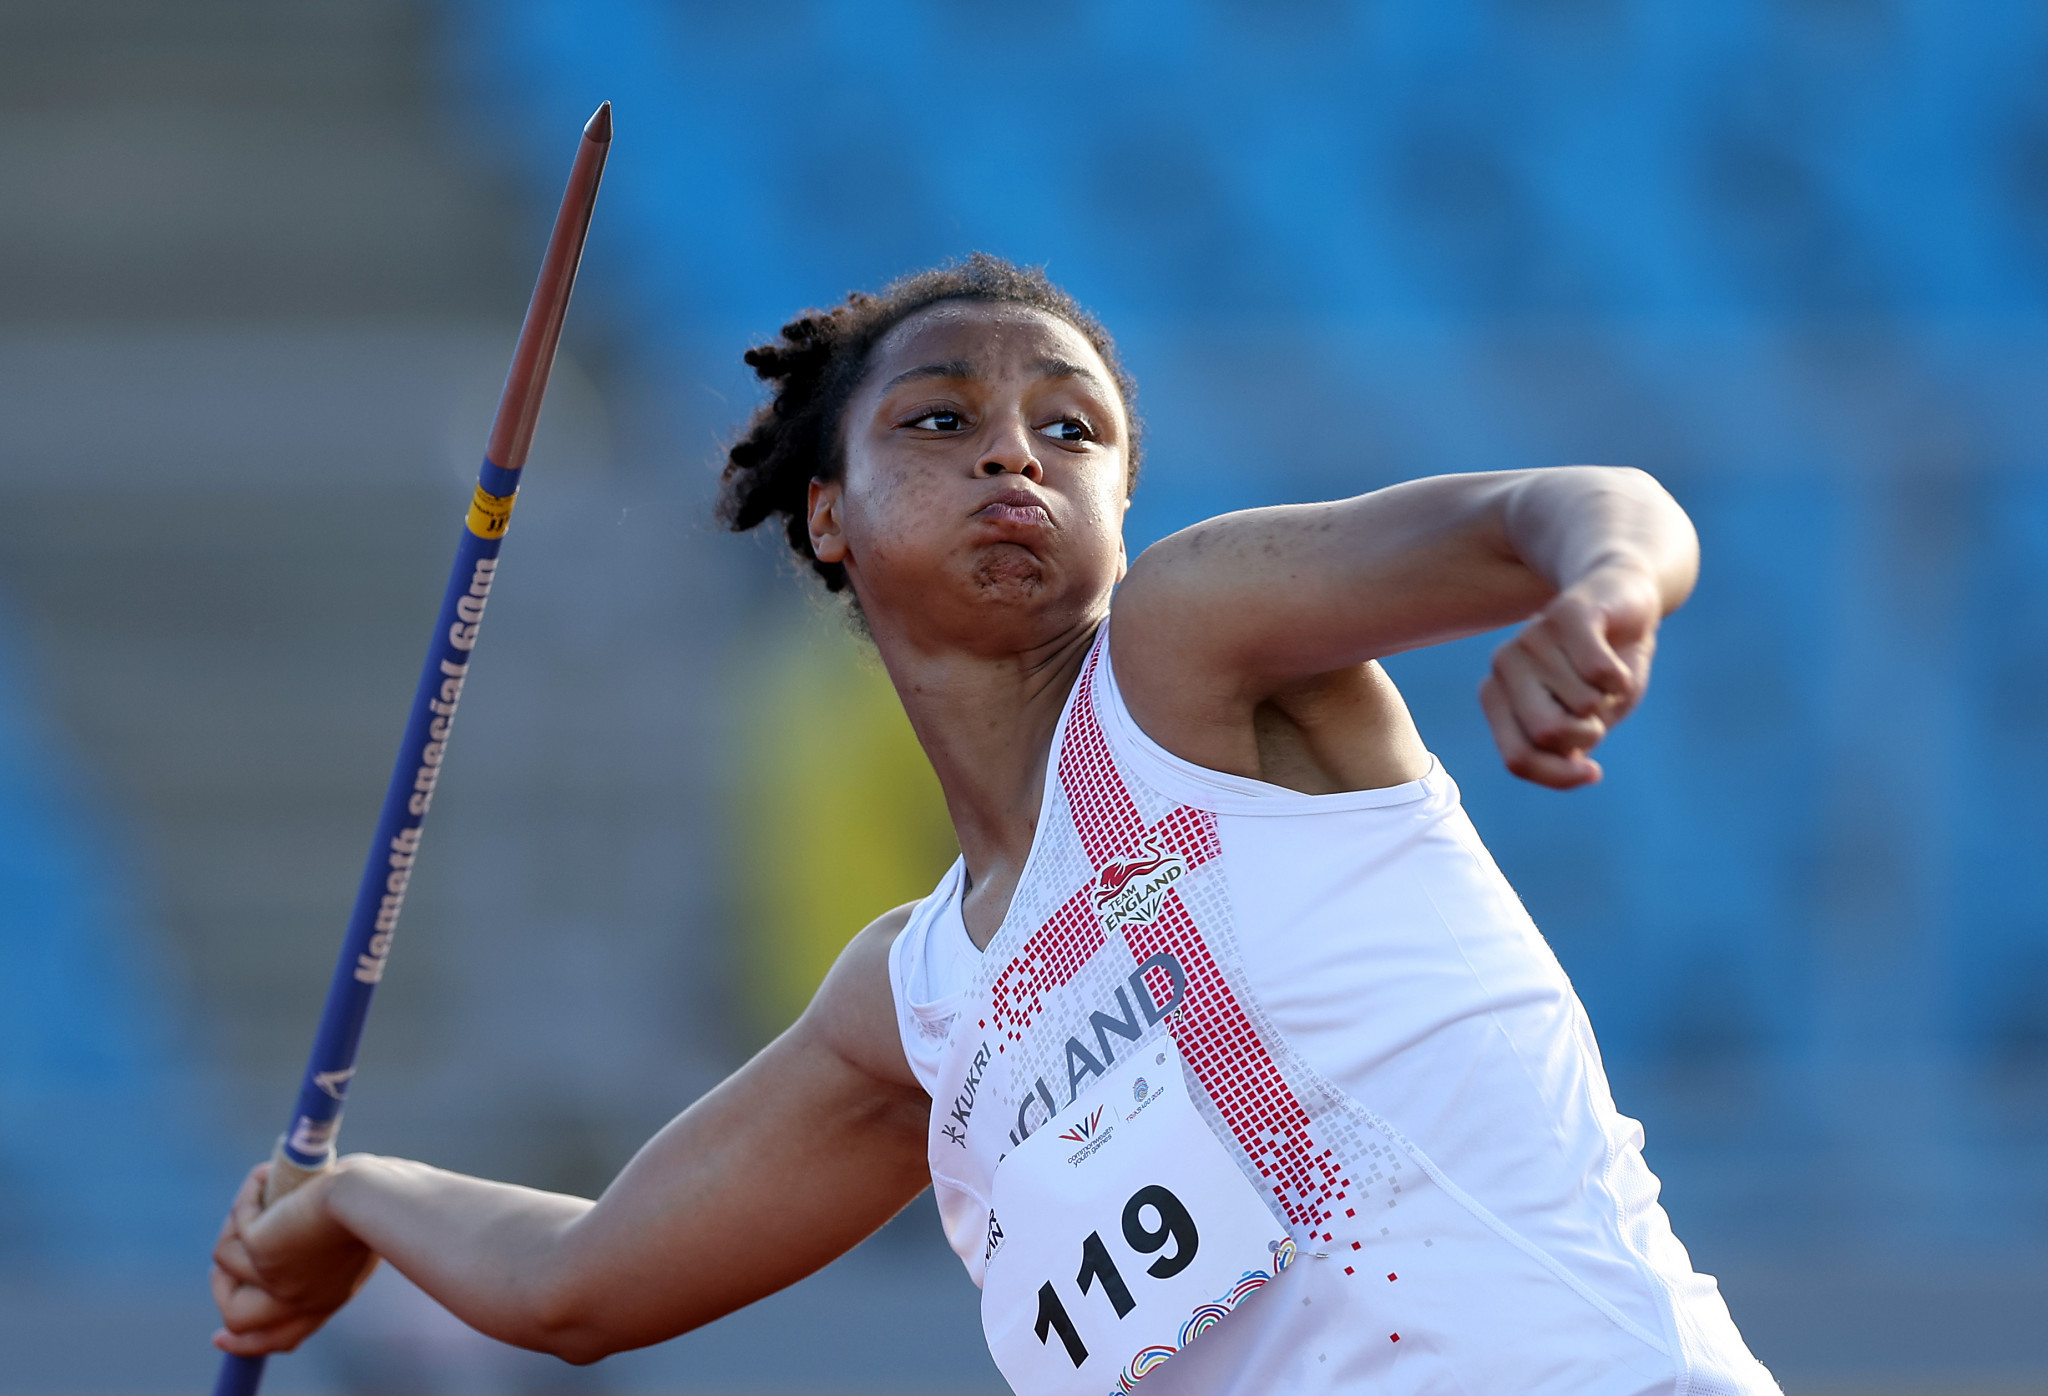 Ayesha Jones produced a Commonwealth Youth Games record 52.49 metres in the women's javelin throw at the Hasely Crawford Stadium ©Getty Images